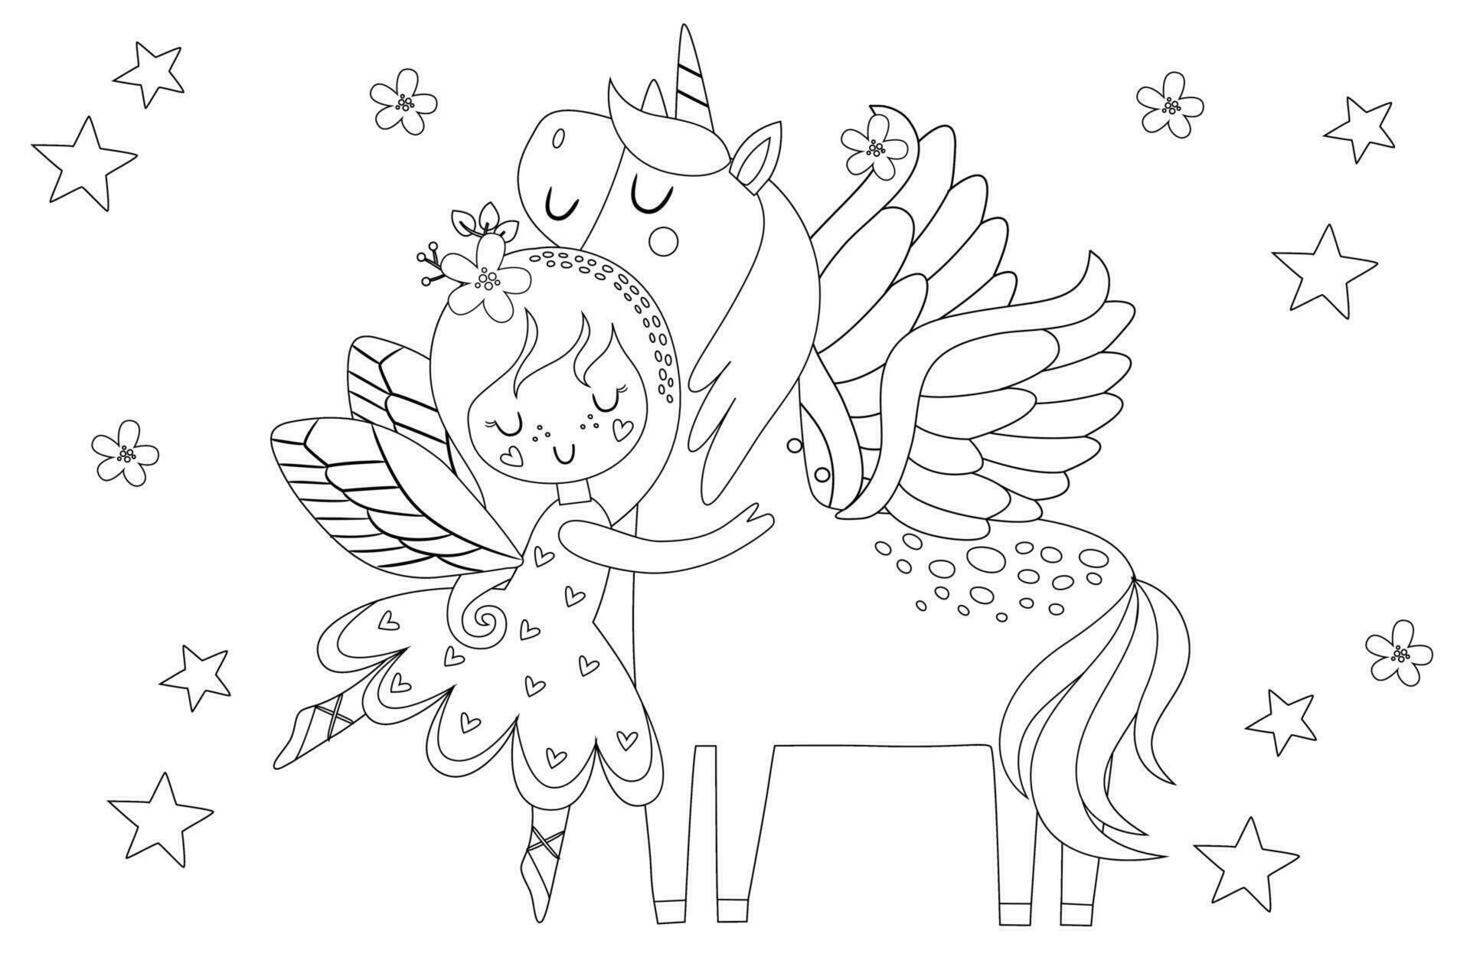 Cute princess fairy hug with a unicorn and flower land  Vector cartoon isolated fairytales illustration. Coloring book page for children with colorful template